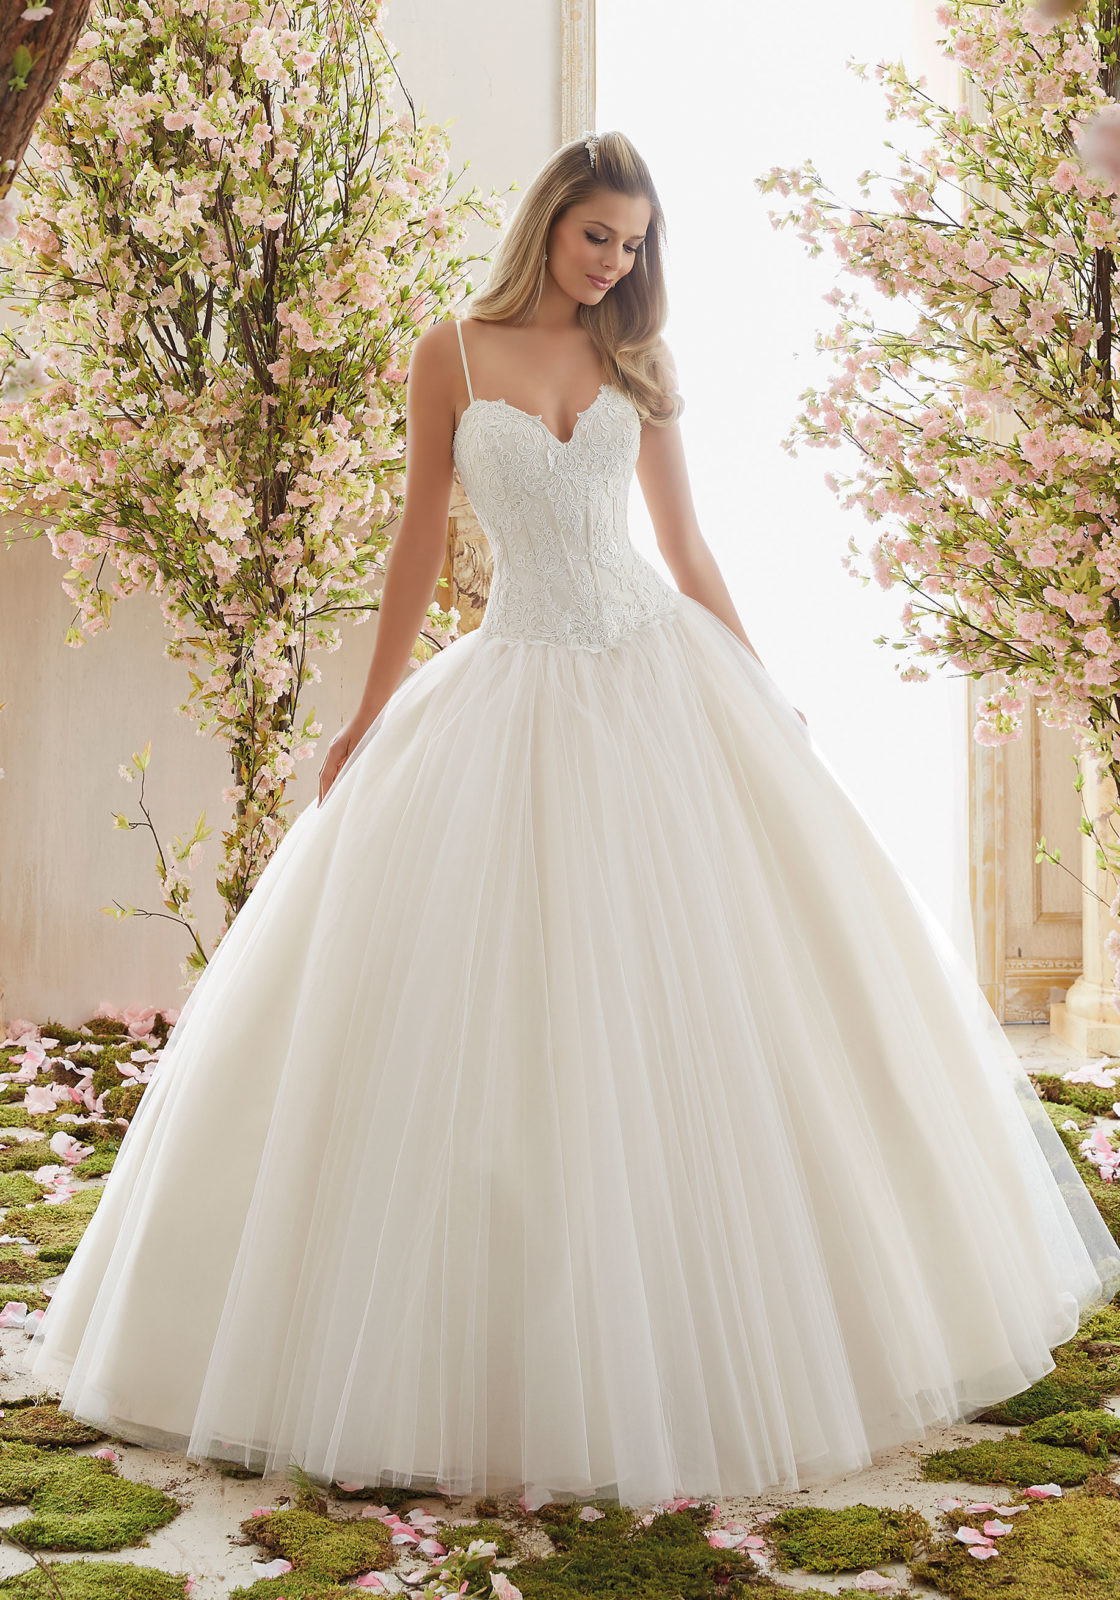 Lace Ball Gown Wedding Dresses
 Chantilly Lace on Tulle Ball Gown Wedding Dress